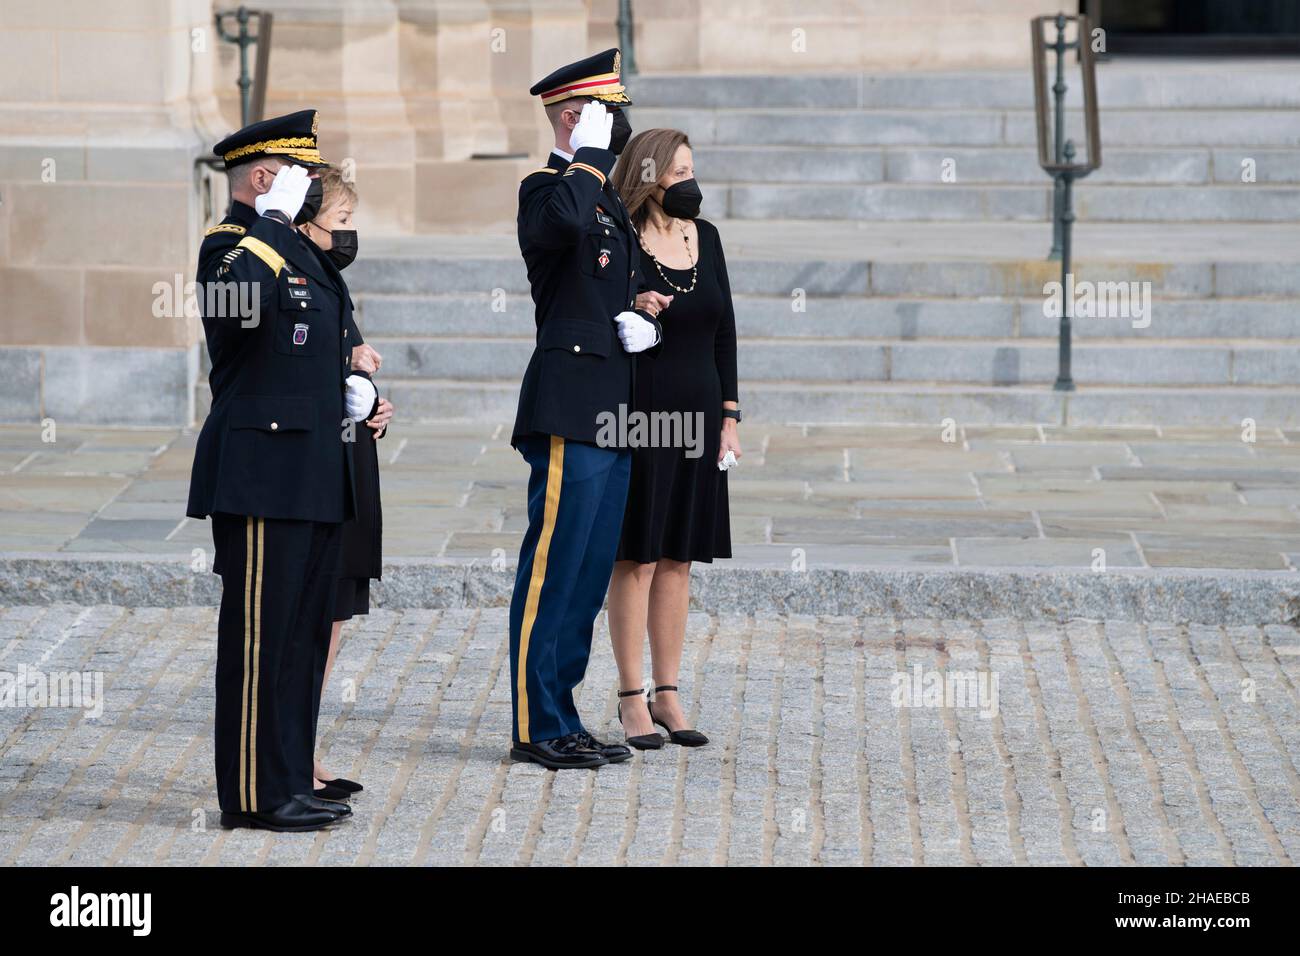 Washington, United States Of America. 10th Dec, 2021. Washington, United States of America. 10 December, 2021. U.S. Chairman of the Joint Chiefs of Staff General Mark Milley and Army Maj. Garrett Beer render honors, as former Senator Elizabeth Dole and daughter Robin Dole watch as Armed Forces honor guard carry the flag-draped casket of World War II veteran and former Senator Robert Dole down the steps of the U.S. Capitol, December 10, 2021 in Washington, DC Senator Dole died at age 98 following a lifetime of service to the nation. Credit: Laura Buchta/U.S. Army/Alamy Live News Stock Photo